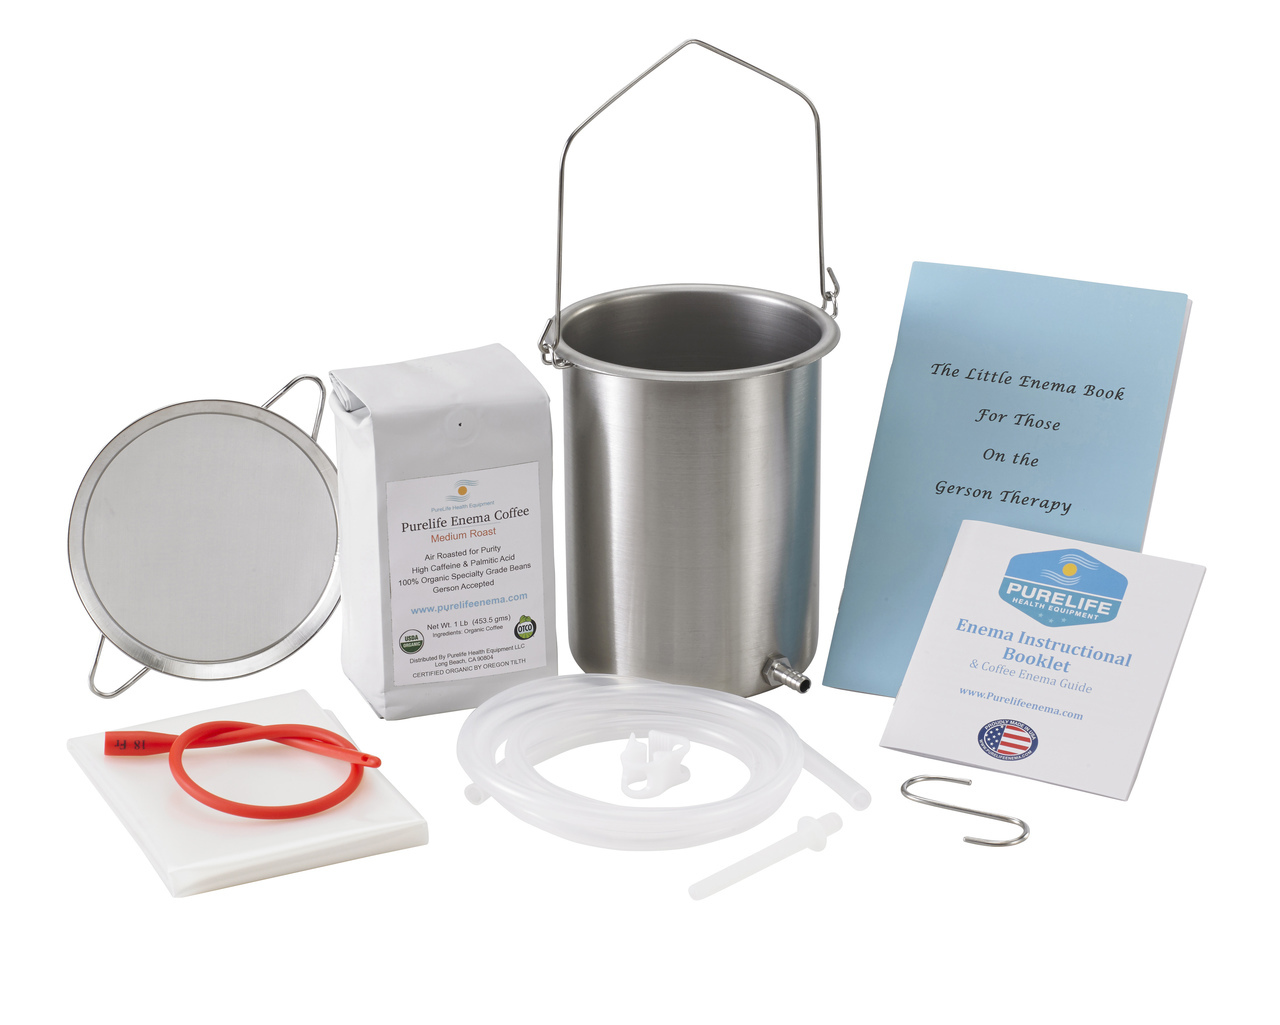 Pure Life #Enema Kits with Stainless Steel Bucket and Pure Silicon Tubing (Medical Grade)